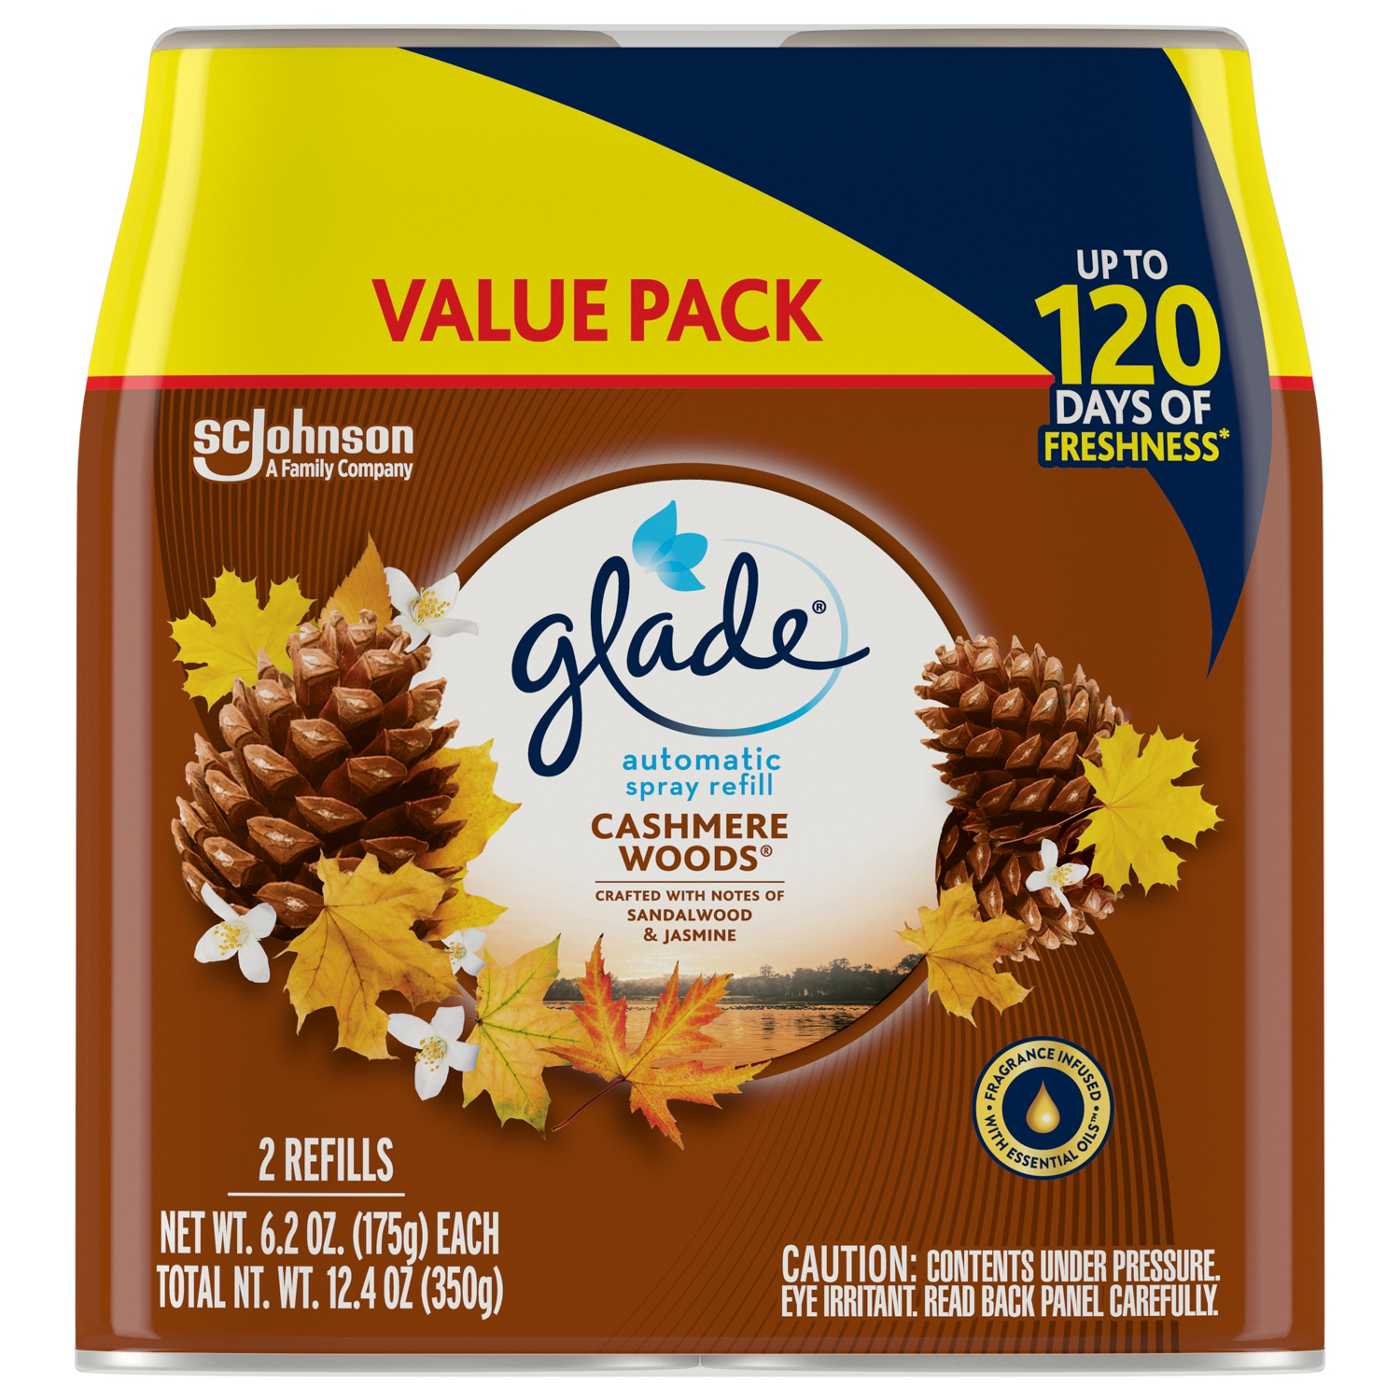 Glade Automatic Spray Refills, Value Pack - Cashmere Woods; image 2 of 3